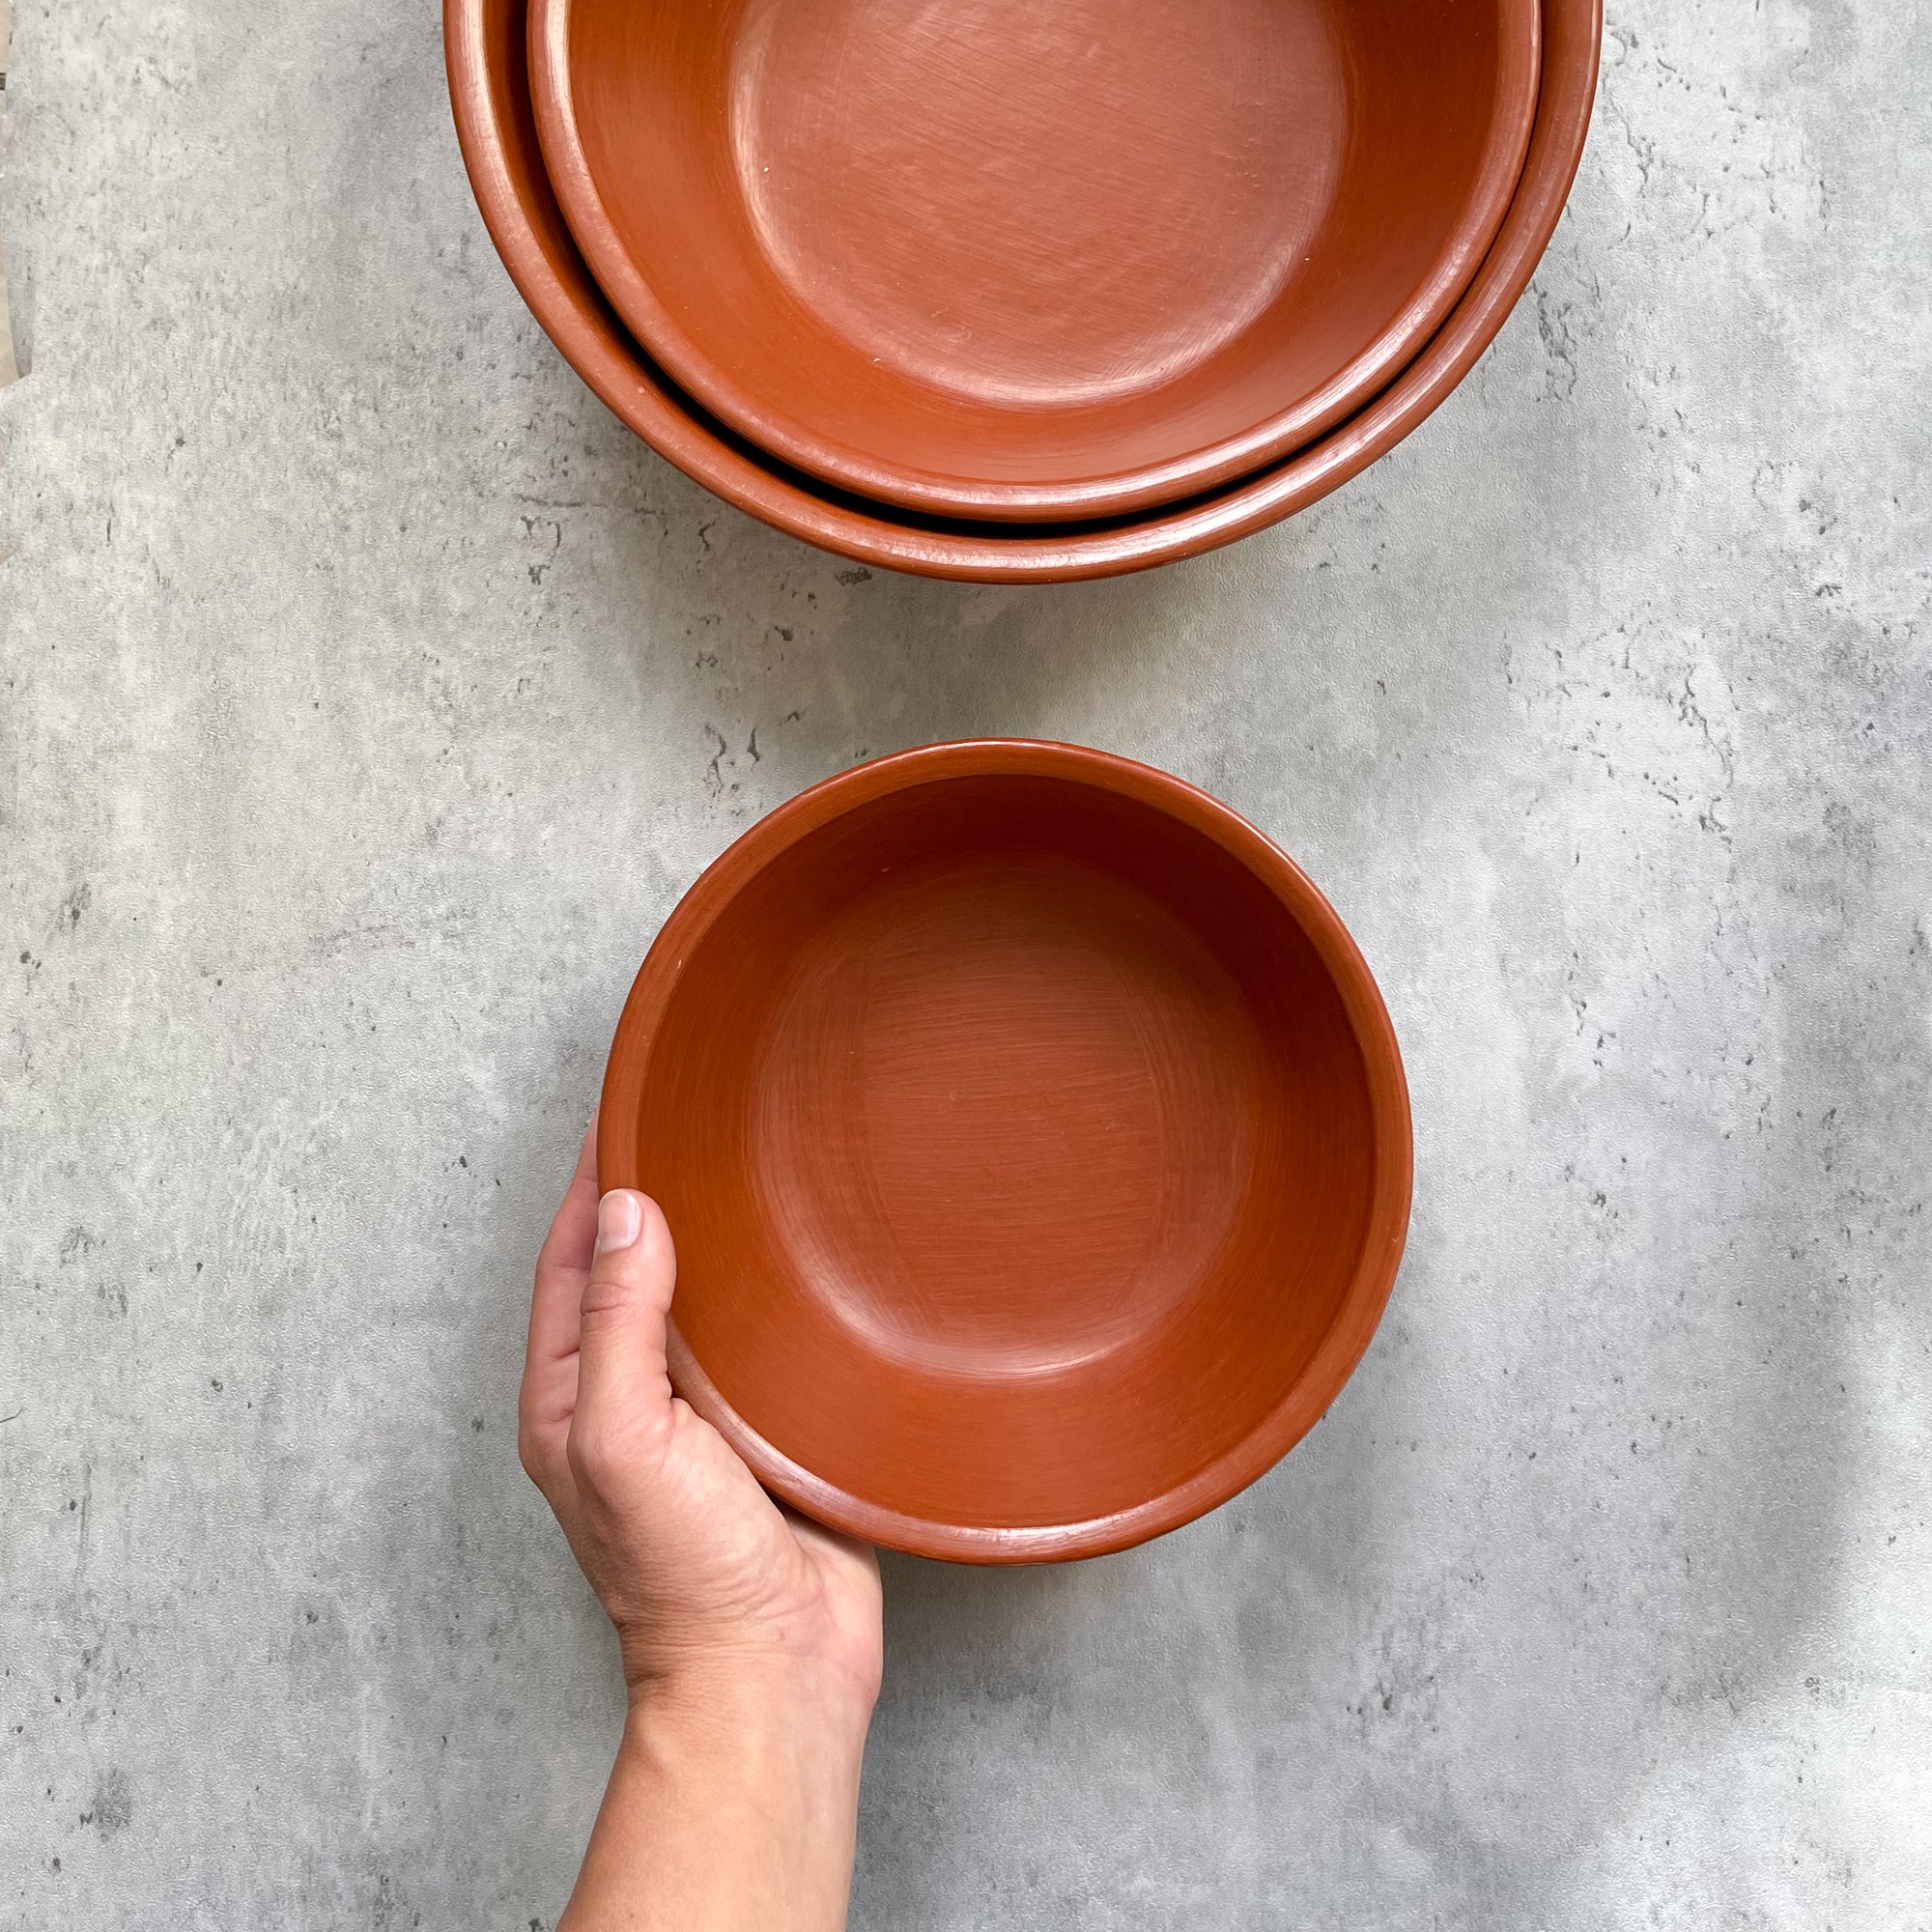 A small Oaxaca red clay serving bowl.